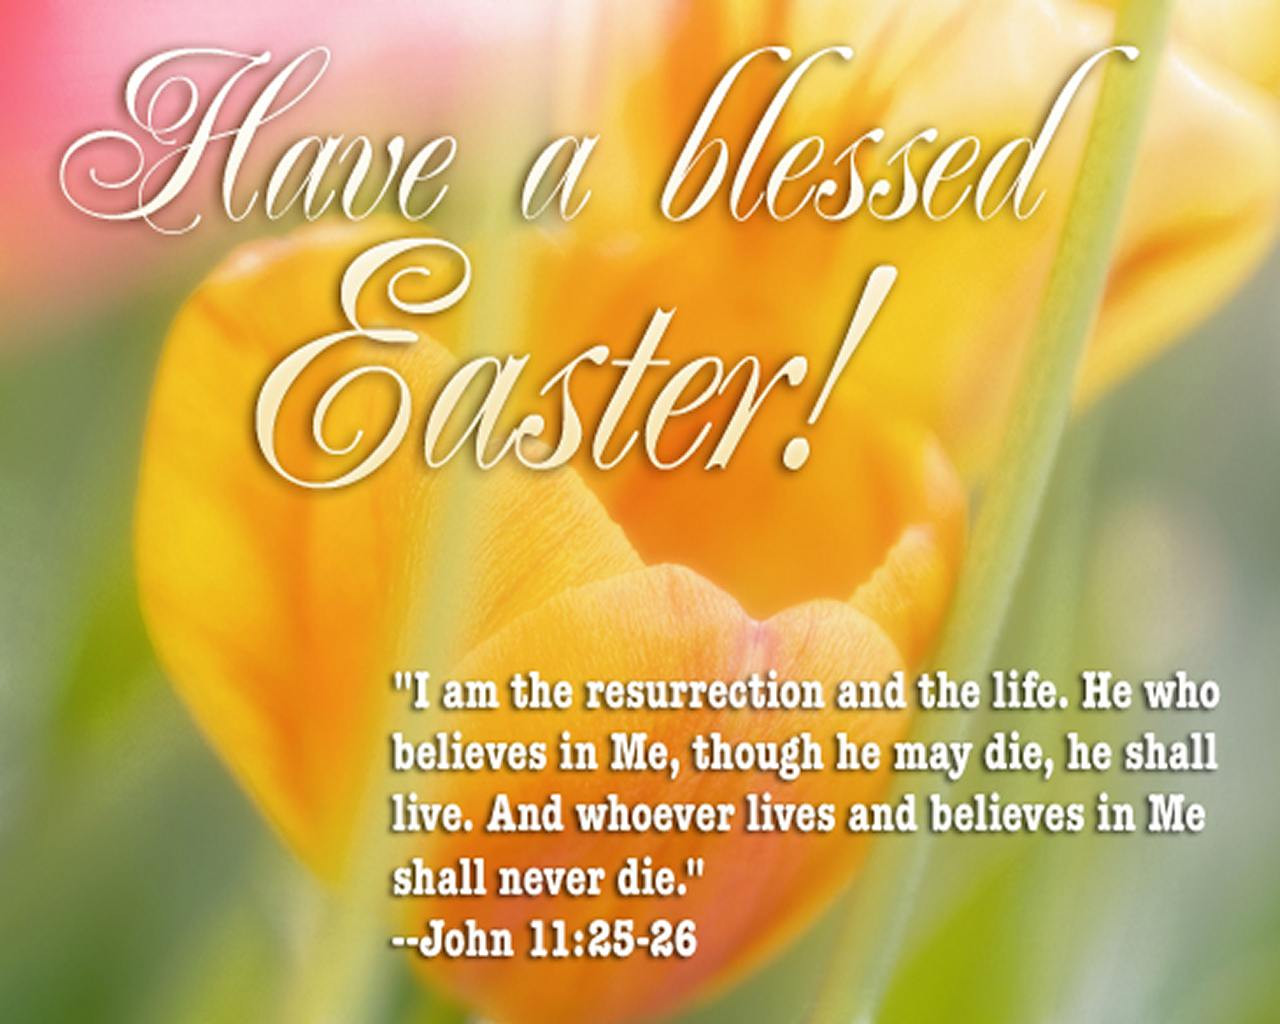 Bible Quotes About Easter
 25 Heart Touching Easter Bible Verses and Resurrection Quotes